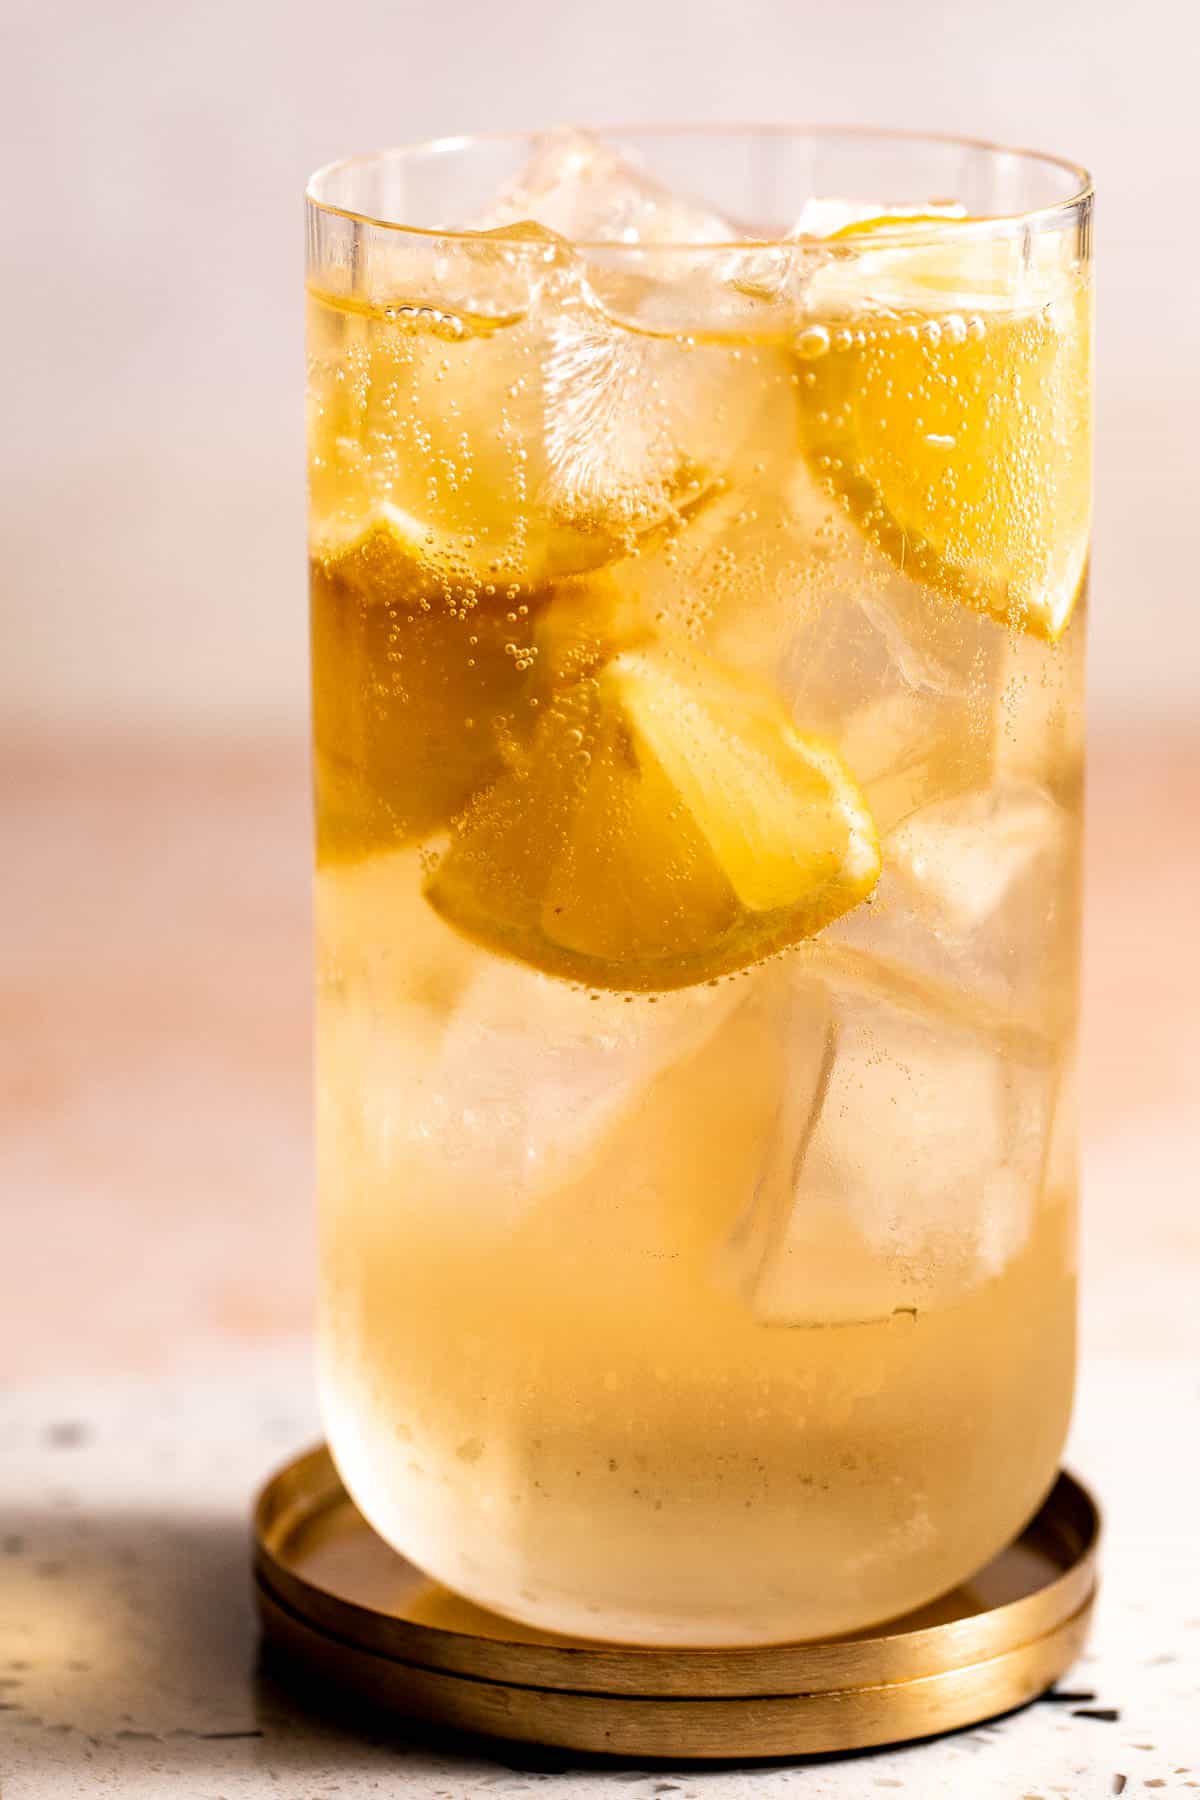 A 7 and 7 cocktail served with ice and lemon wedges in a highball glass.